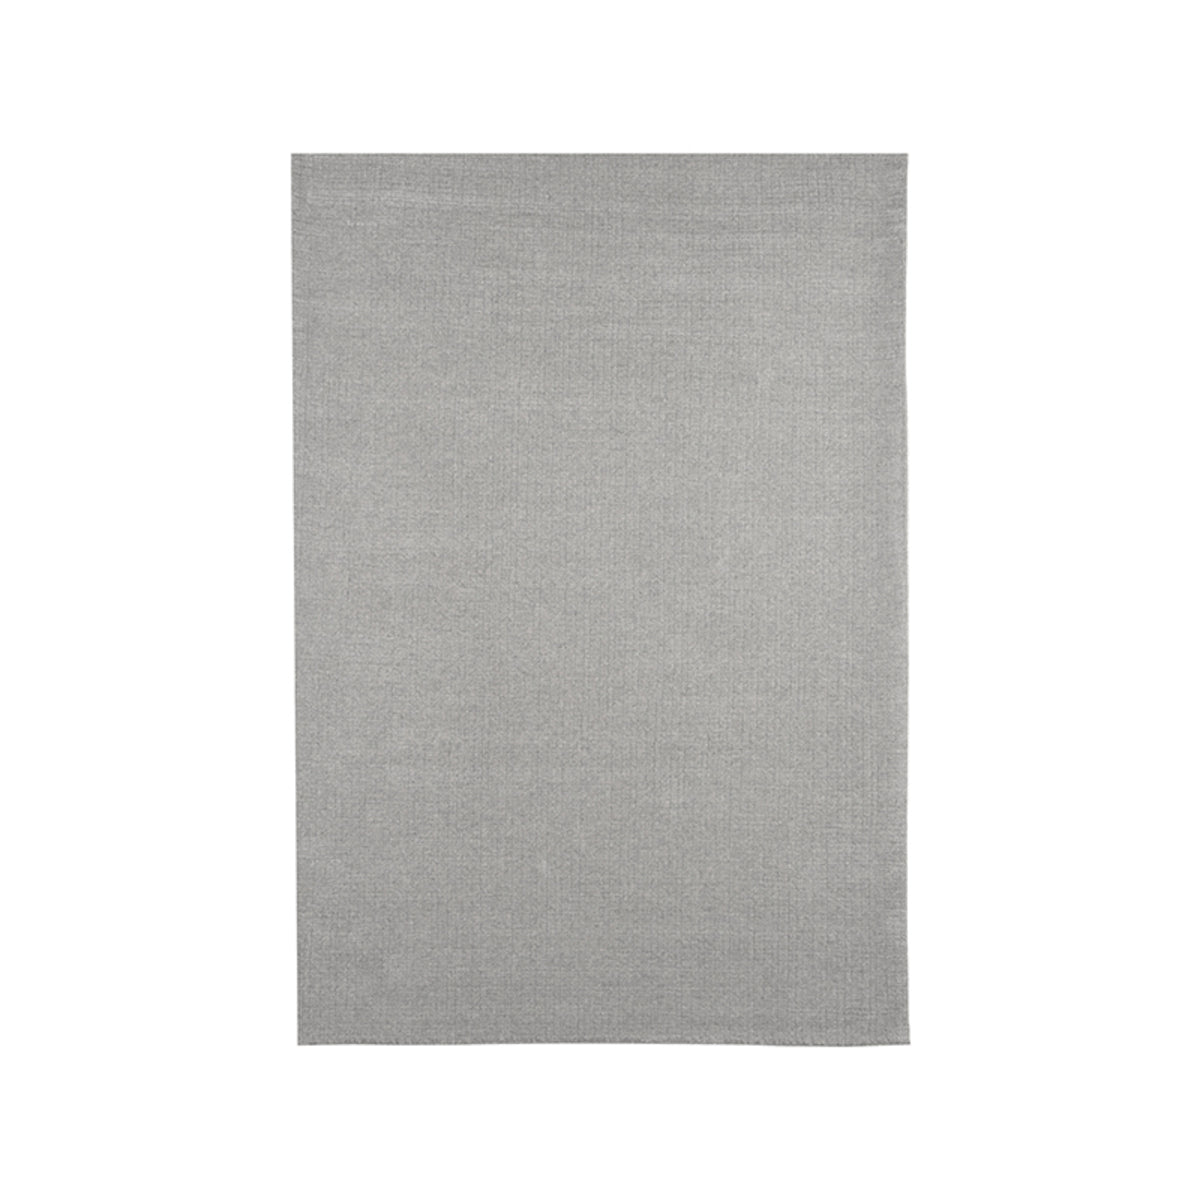 LABEL51 Rugs Wolly - Gray - Wool - 160x230 cm